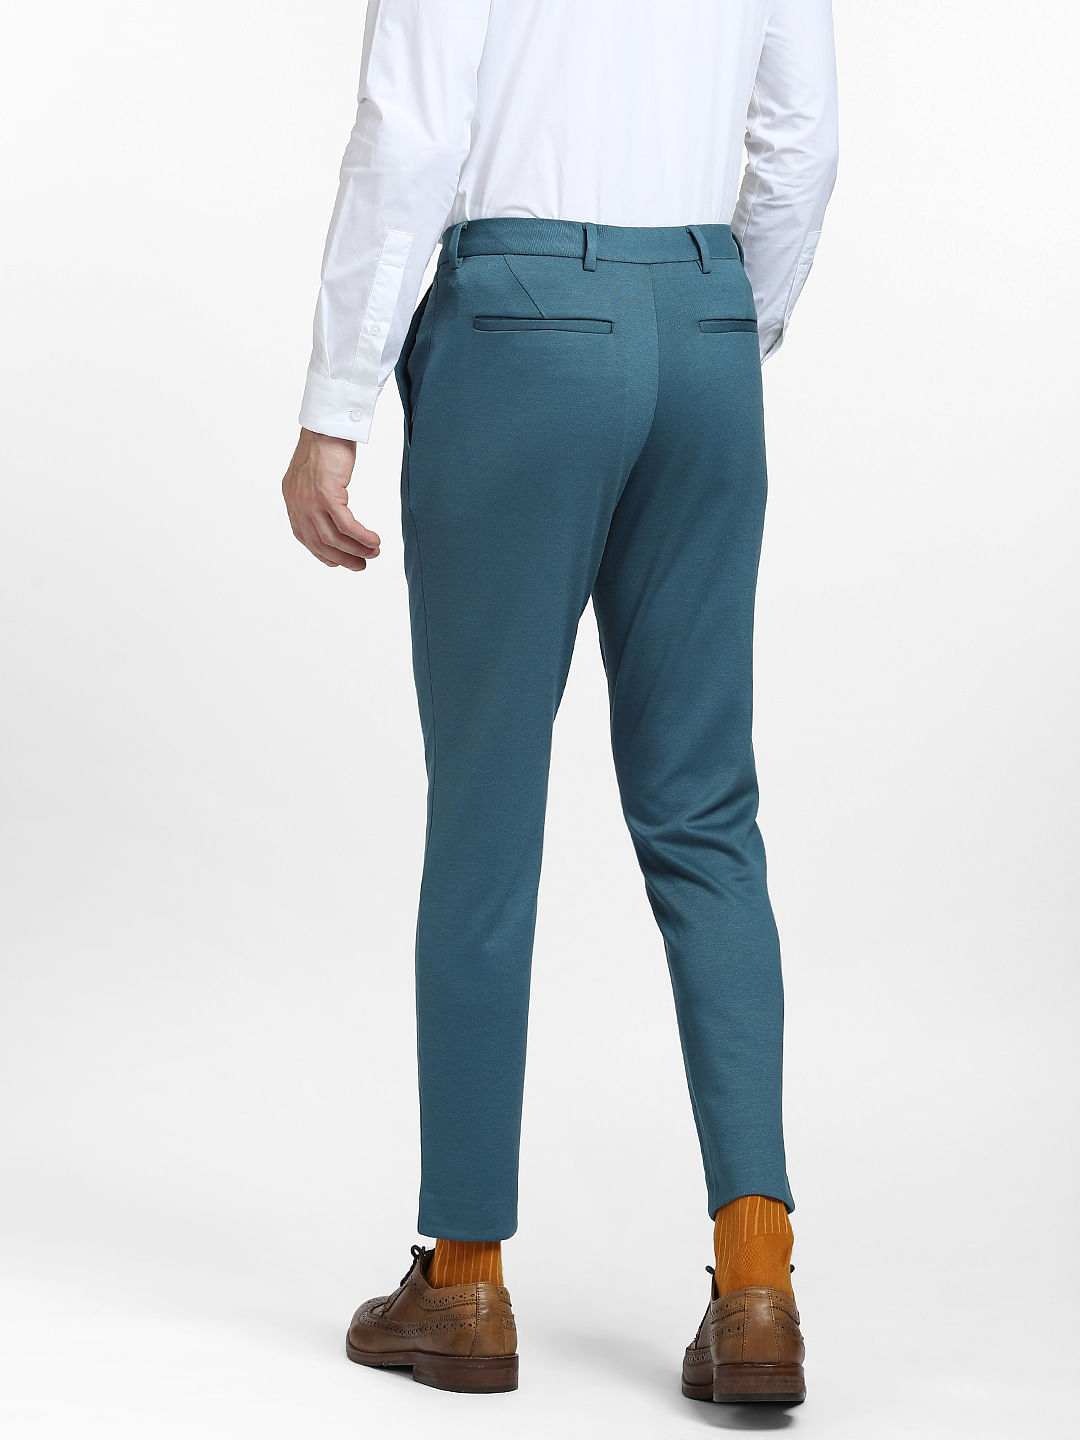 Classic suit belt and trousers of a man with his hands in the pockets Stock  Photo  Alamy